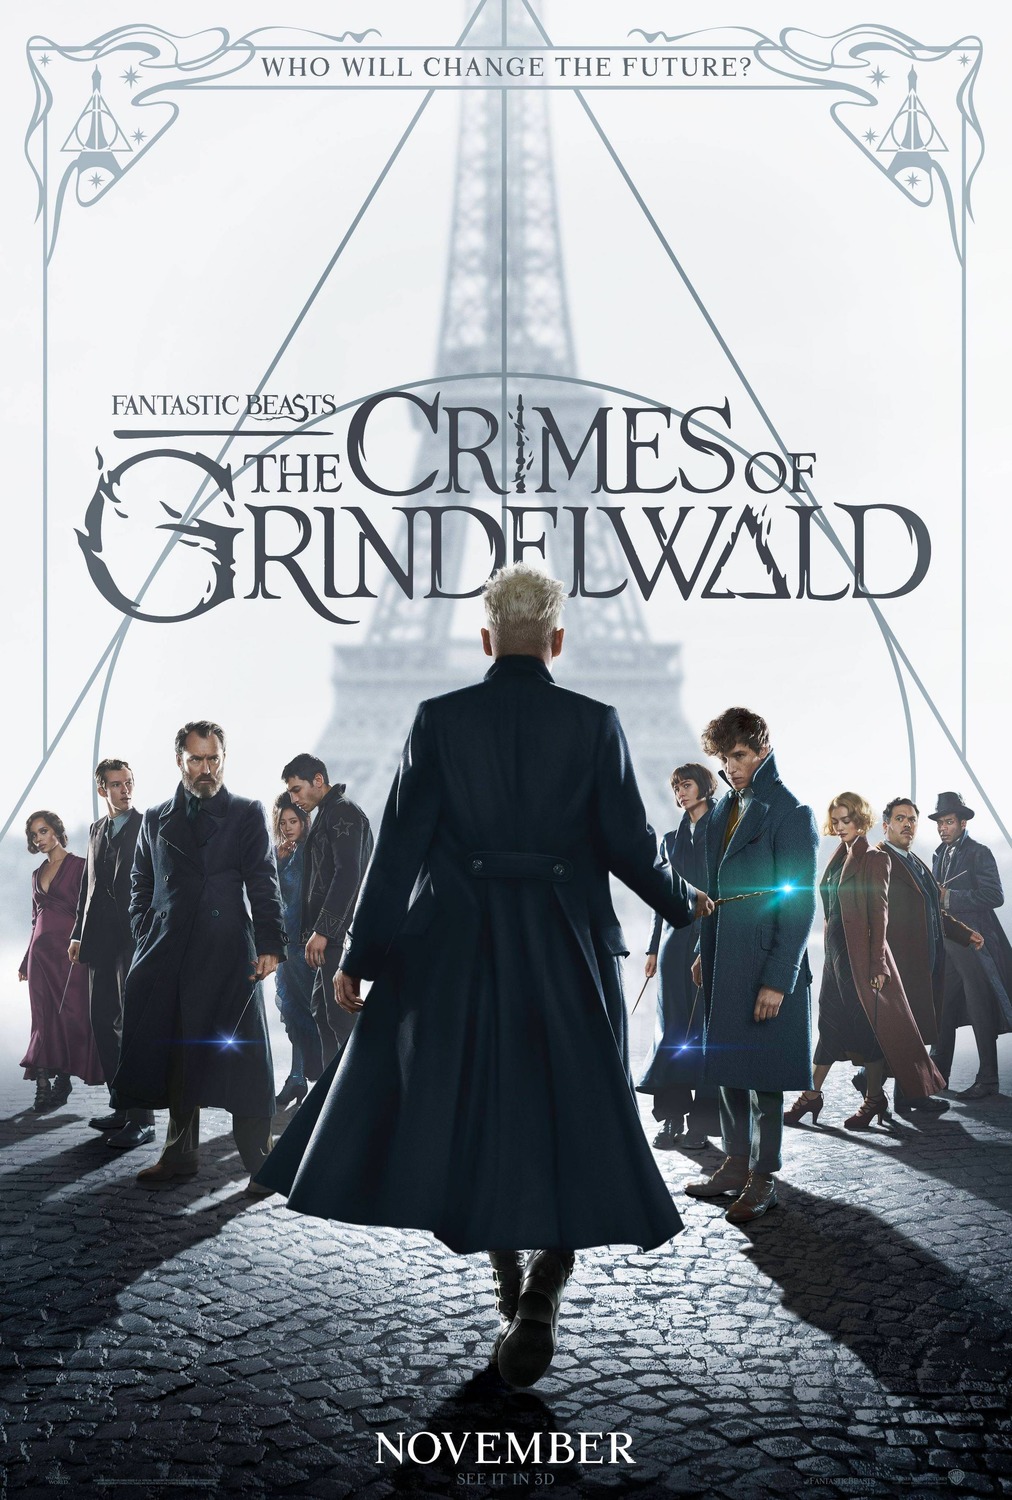 Extra Large Movie Poster Image for Fantastic Beasts: The Crimes of Grindelwald (#14 of 32)